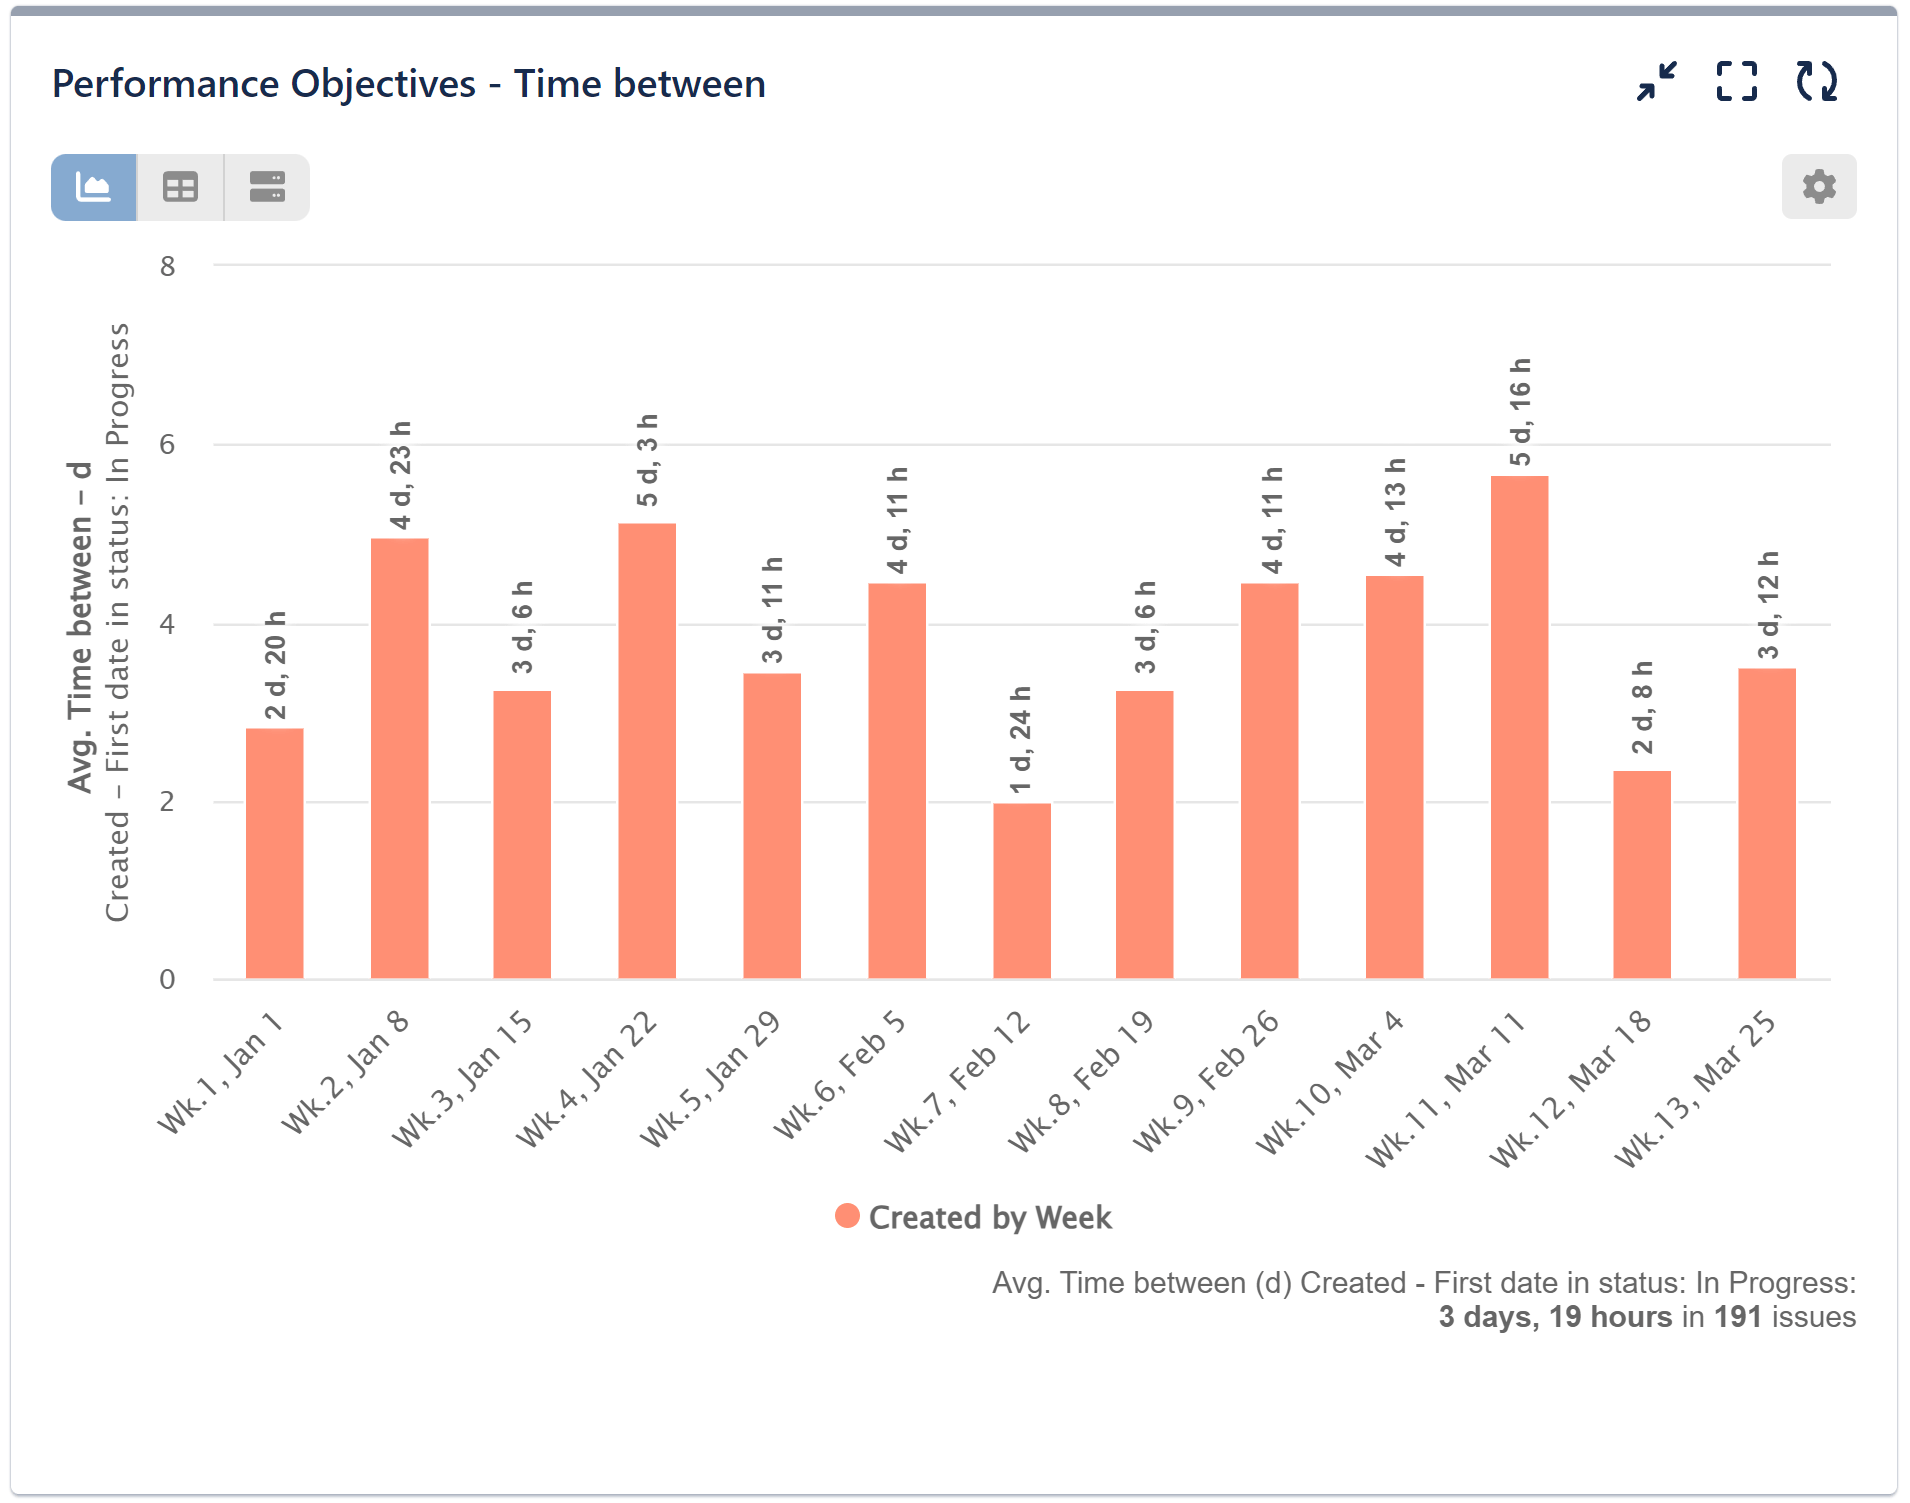 Performance Objectives for Jira app Average Time between